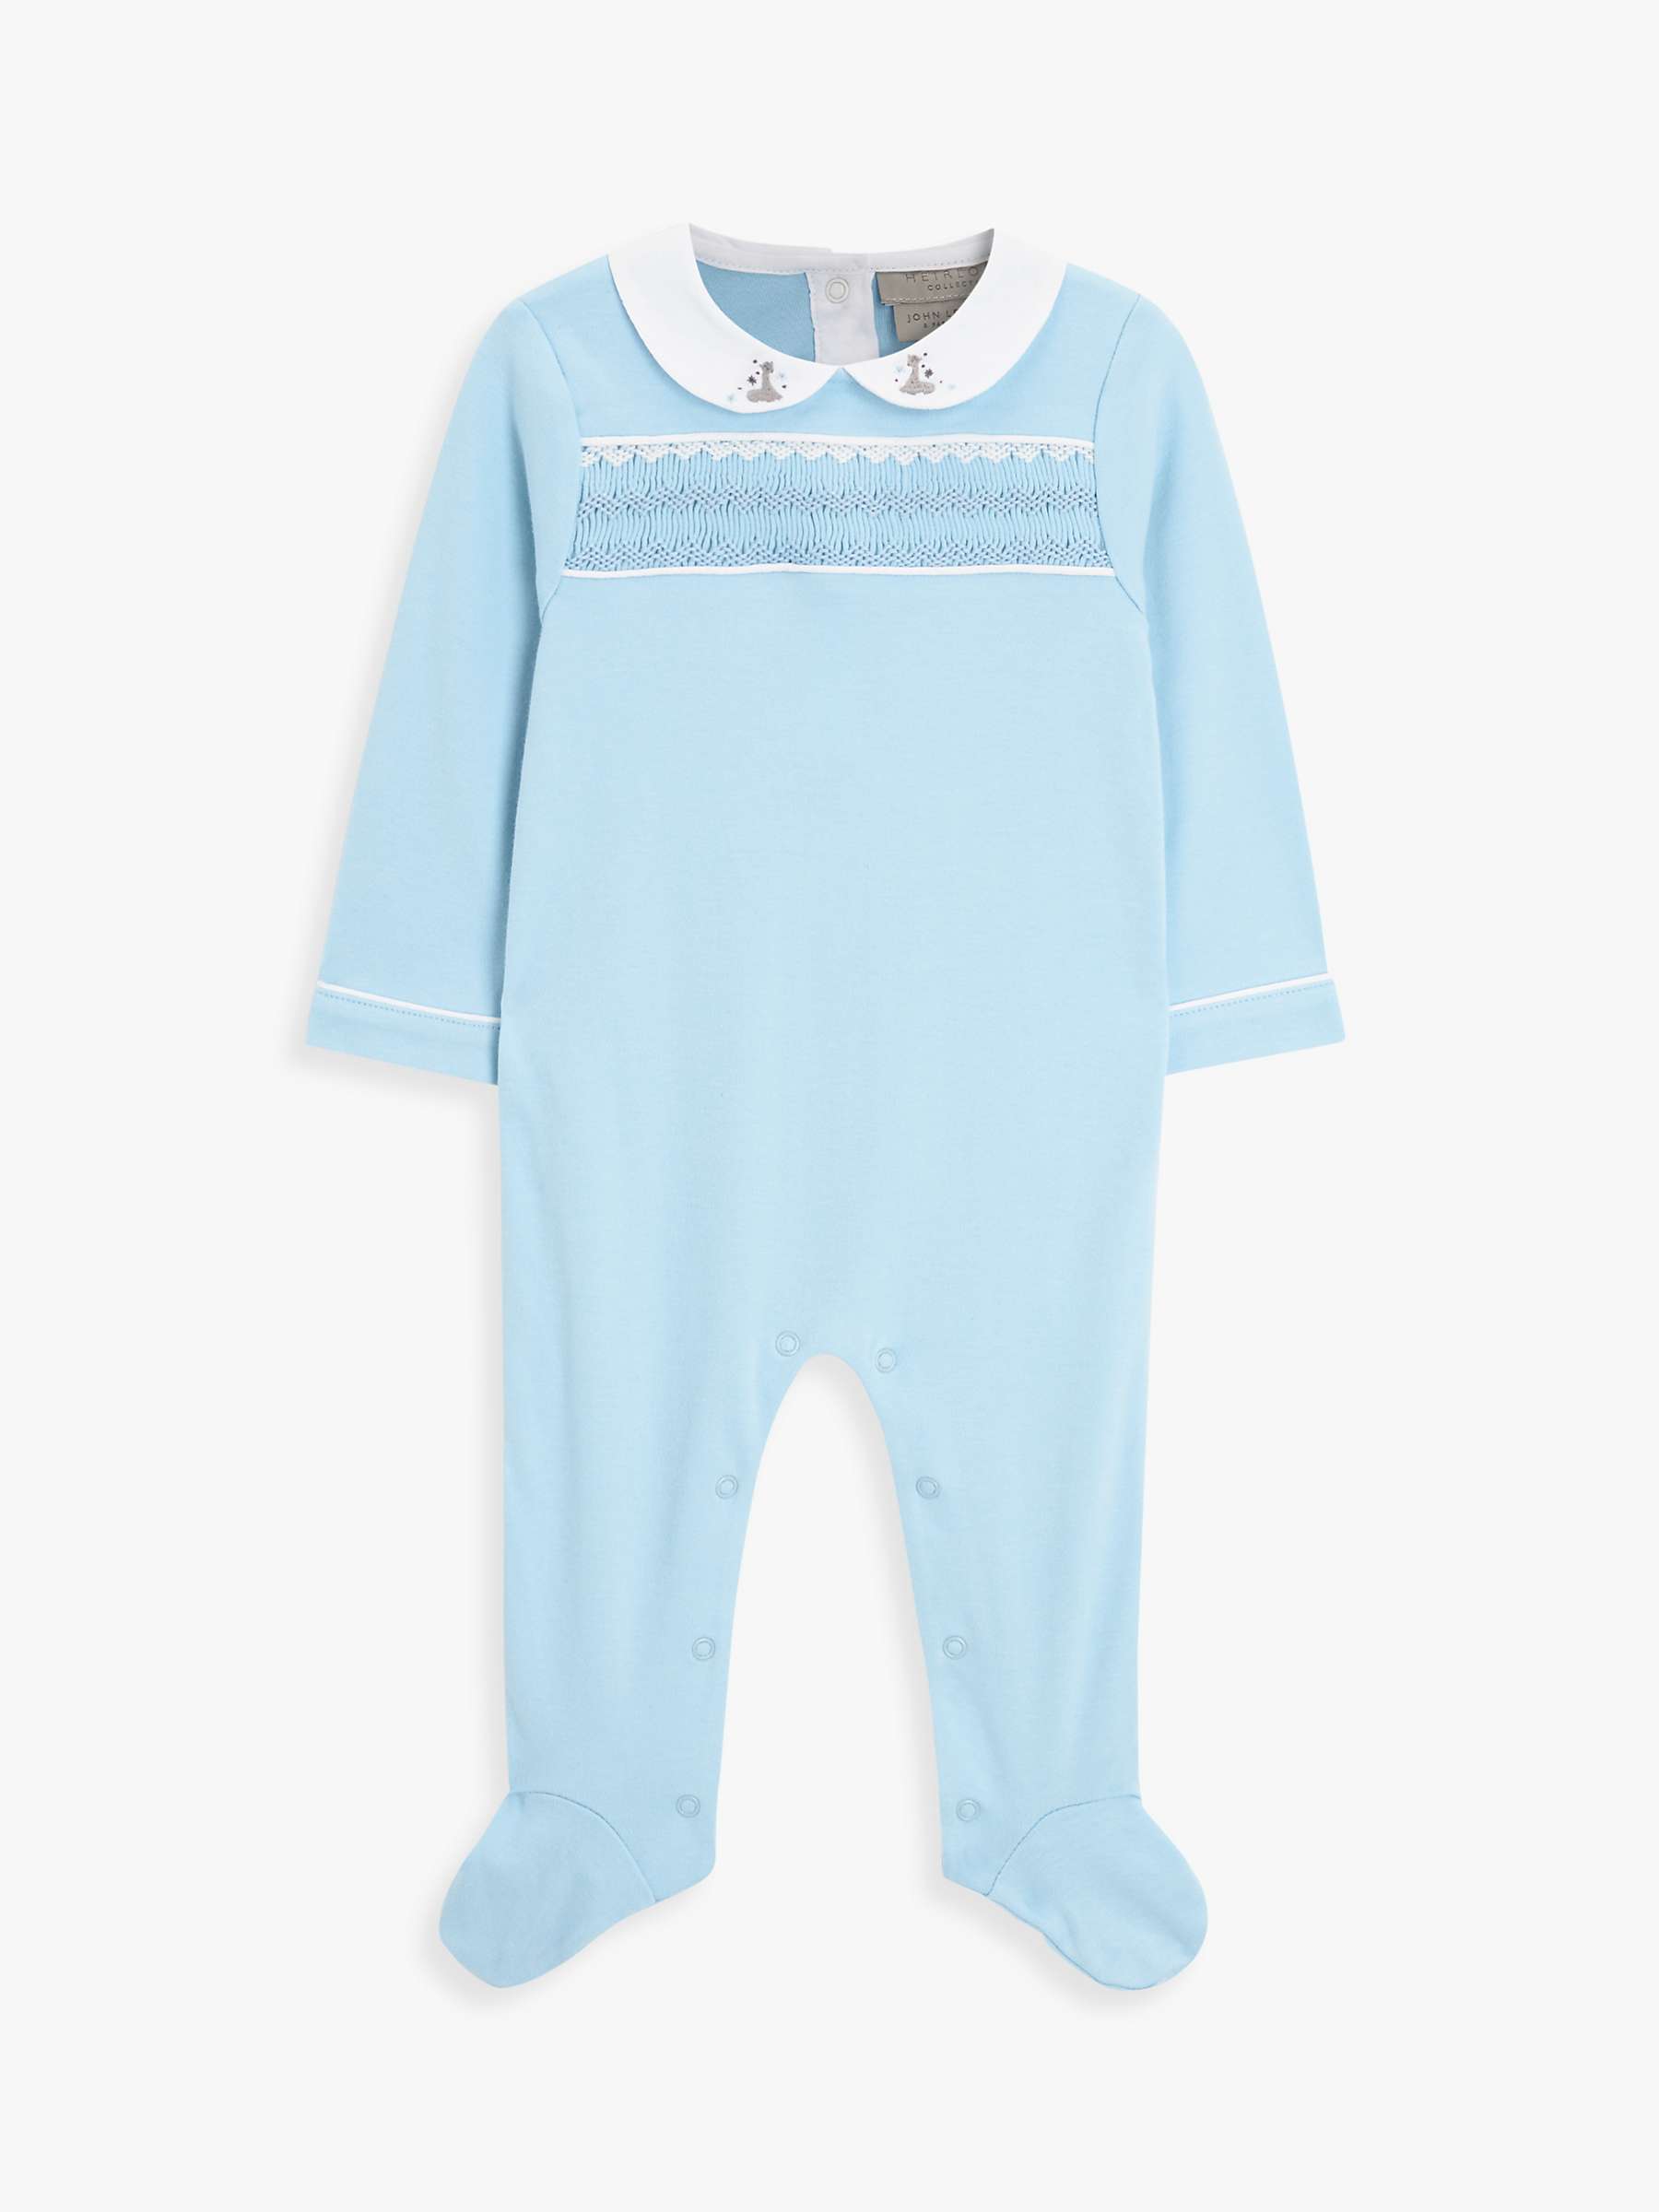 Buy John Lewis Heirloom Collection Baby Pima Cotton Smocked Sleepsuit, Blue Online at johnlewis.com